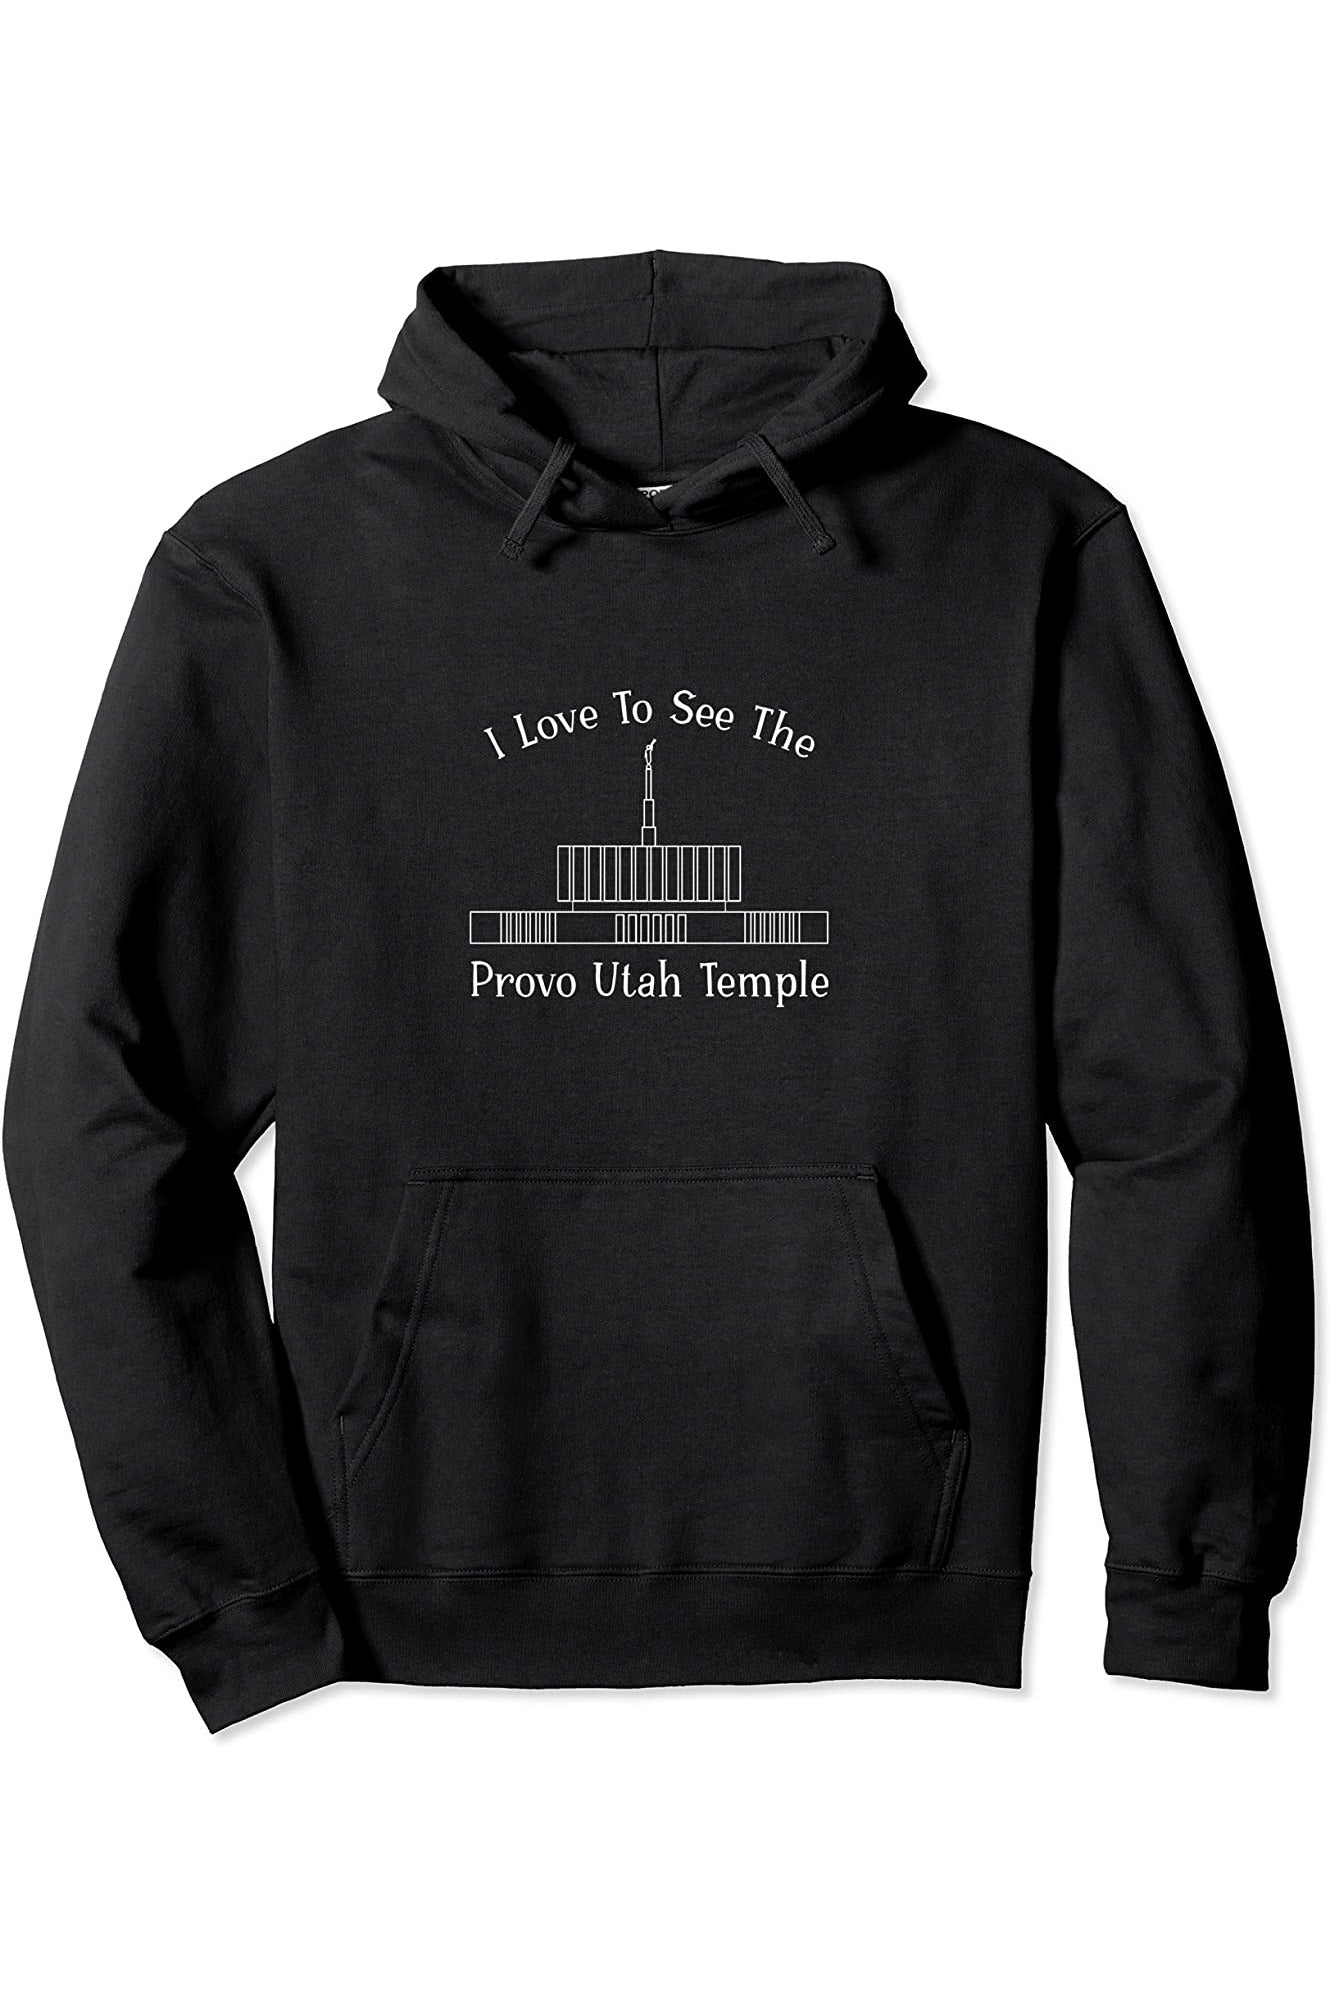 Provo Utah Temple Pullover Hoodie - Happy Style (English) US